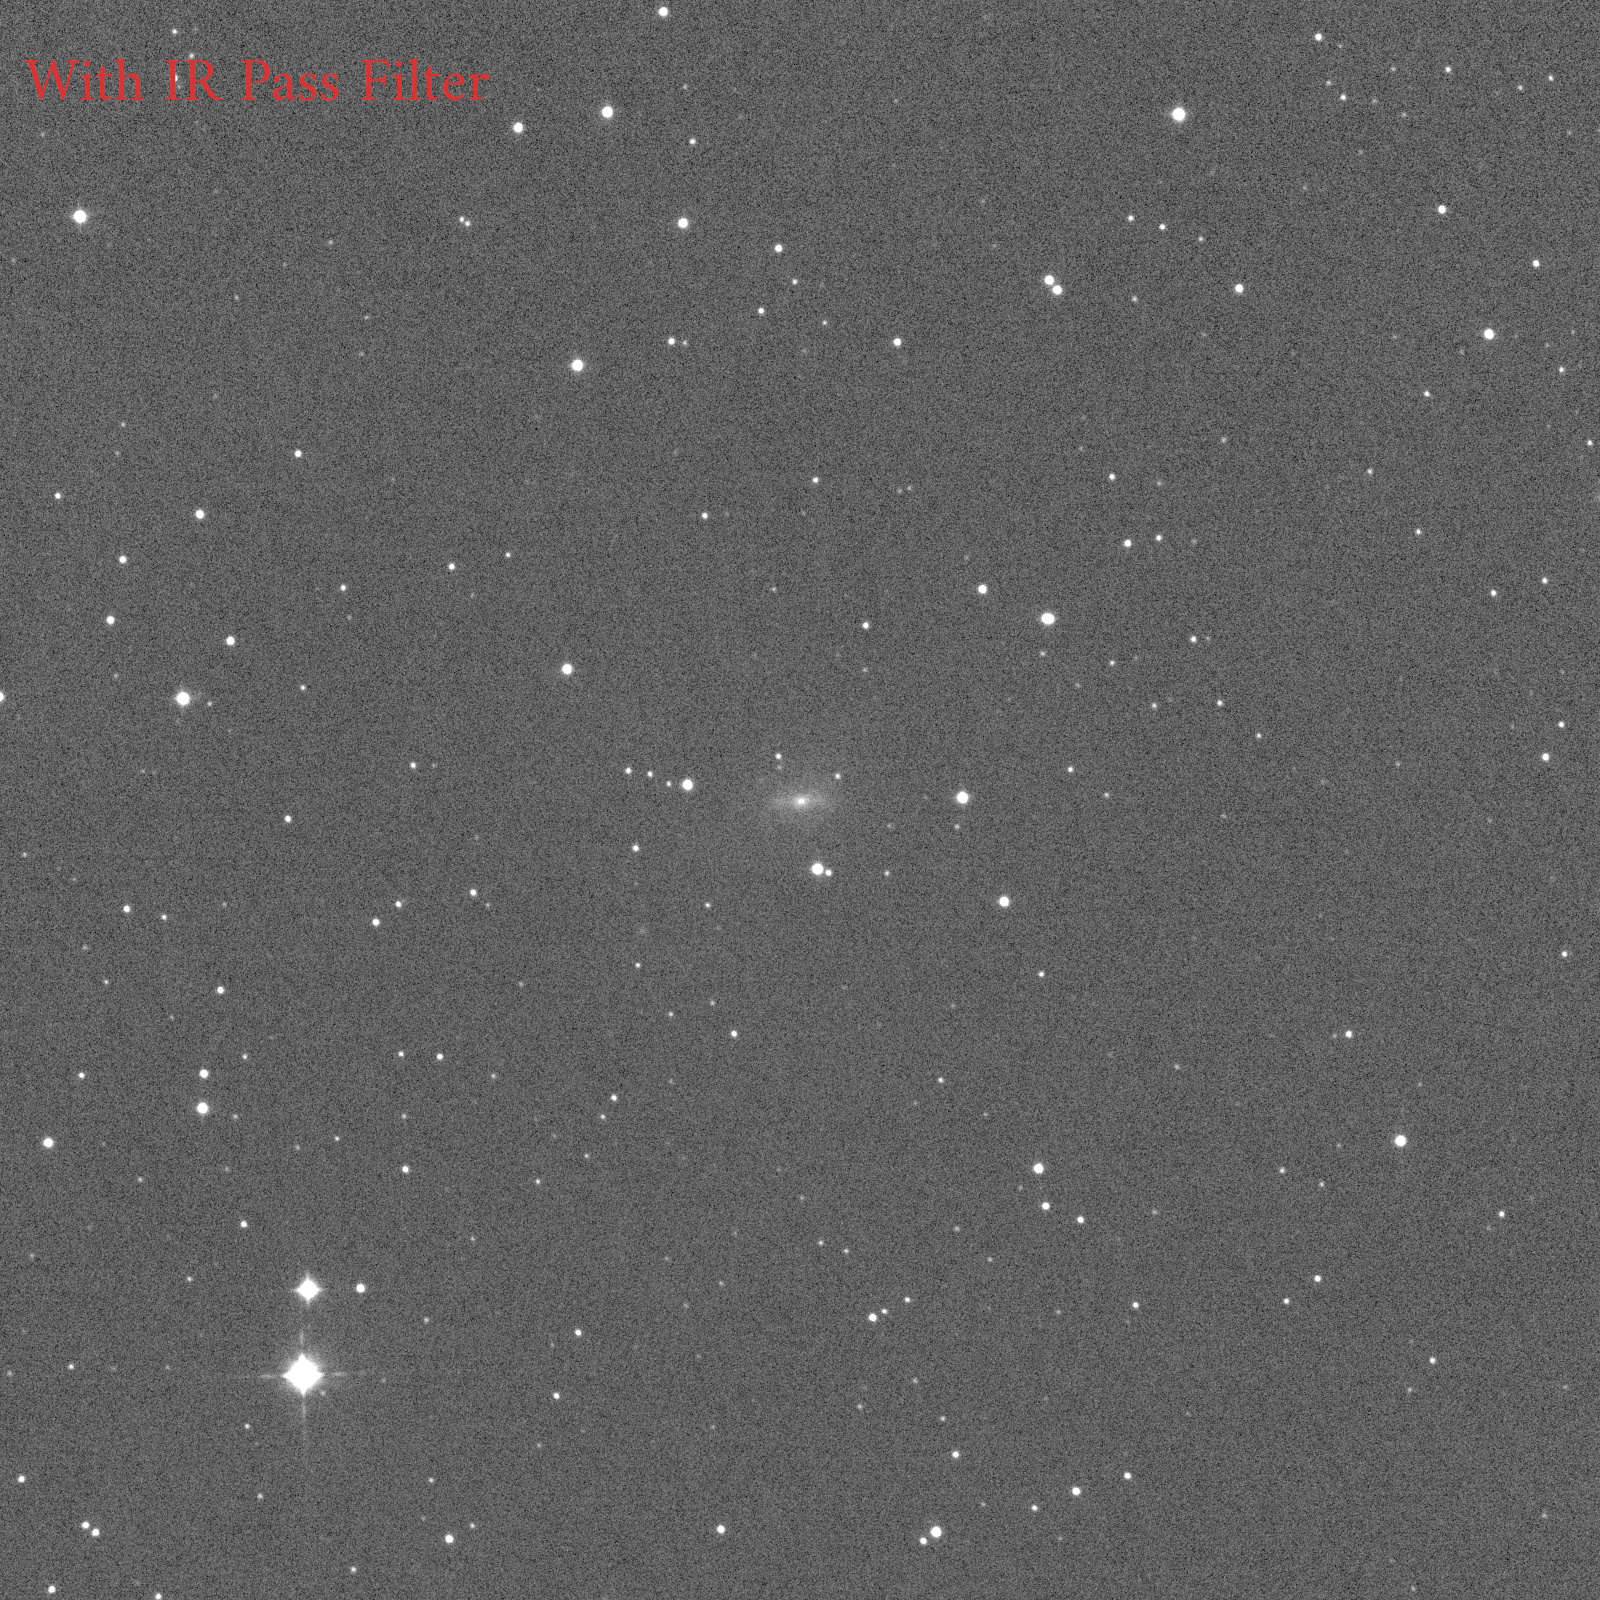 NGC1784 With IRpass